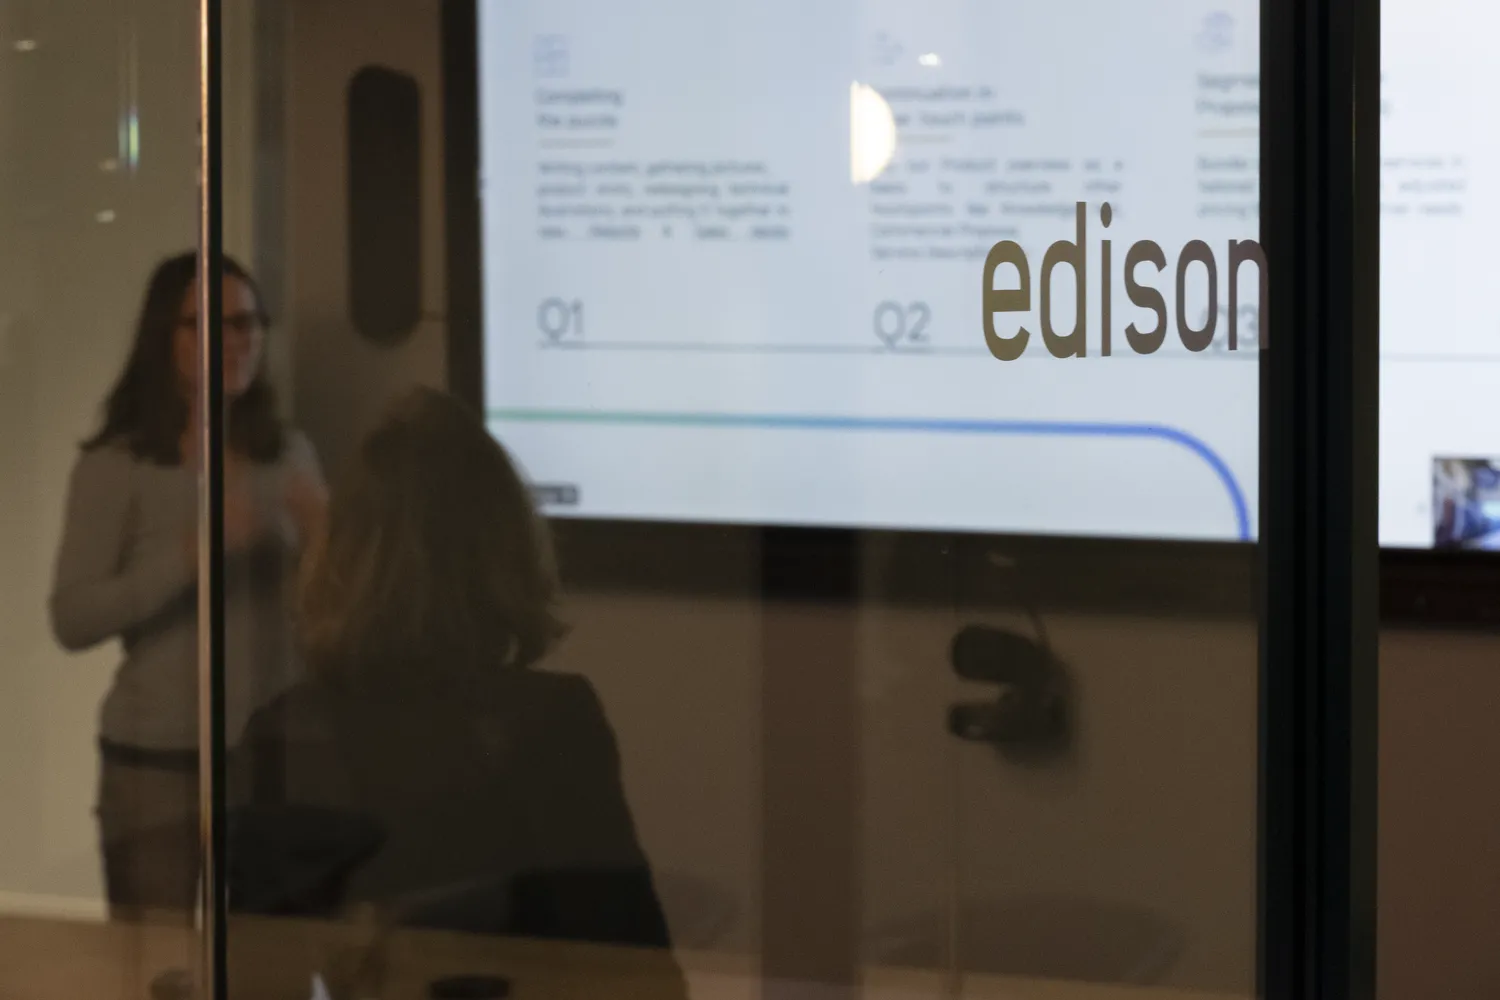 Meeting room named Edison in GreenFlux's new office